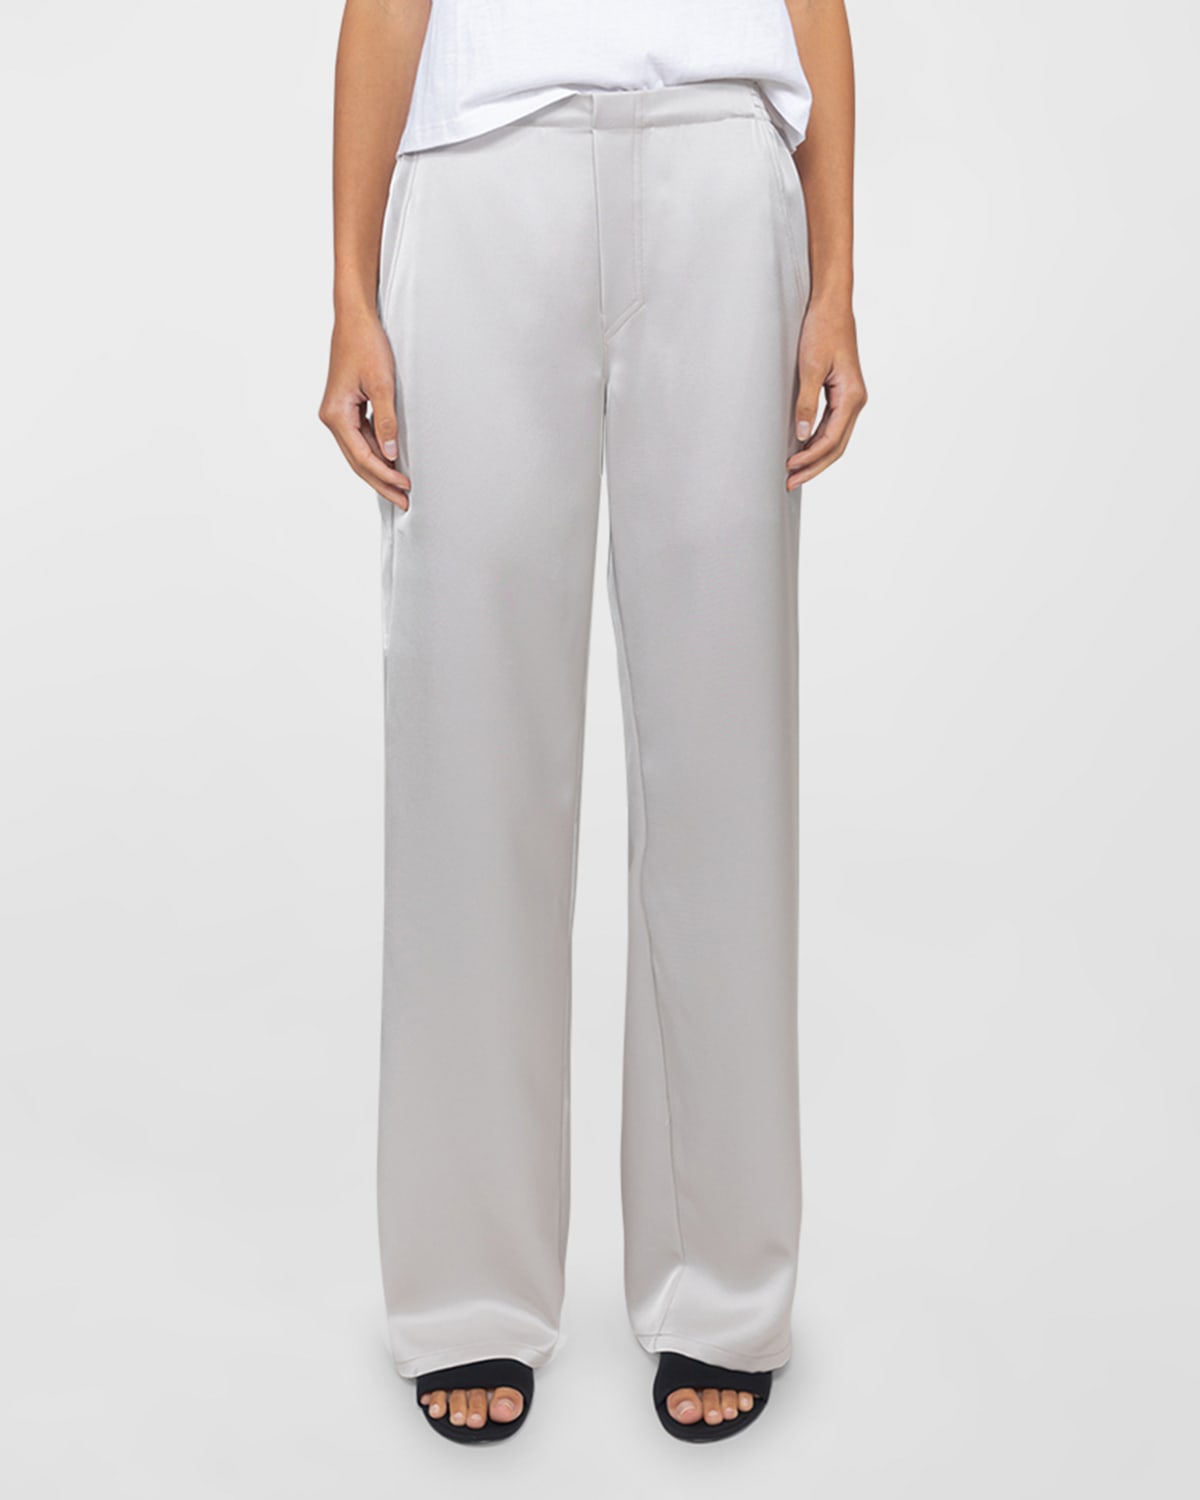 Leset Barb Satin Painter Trousers In Cement